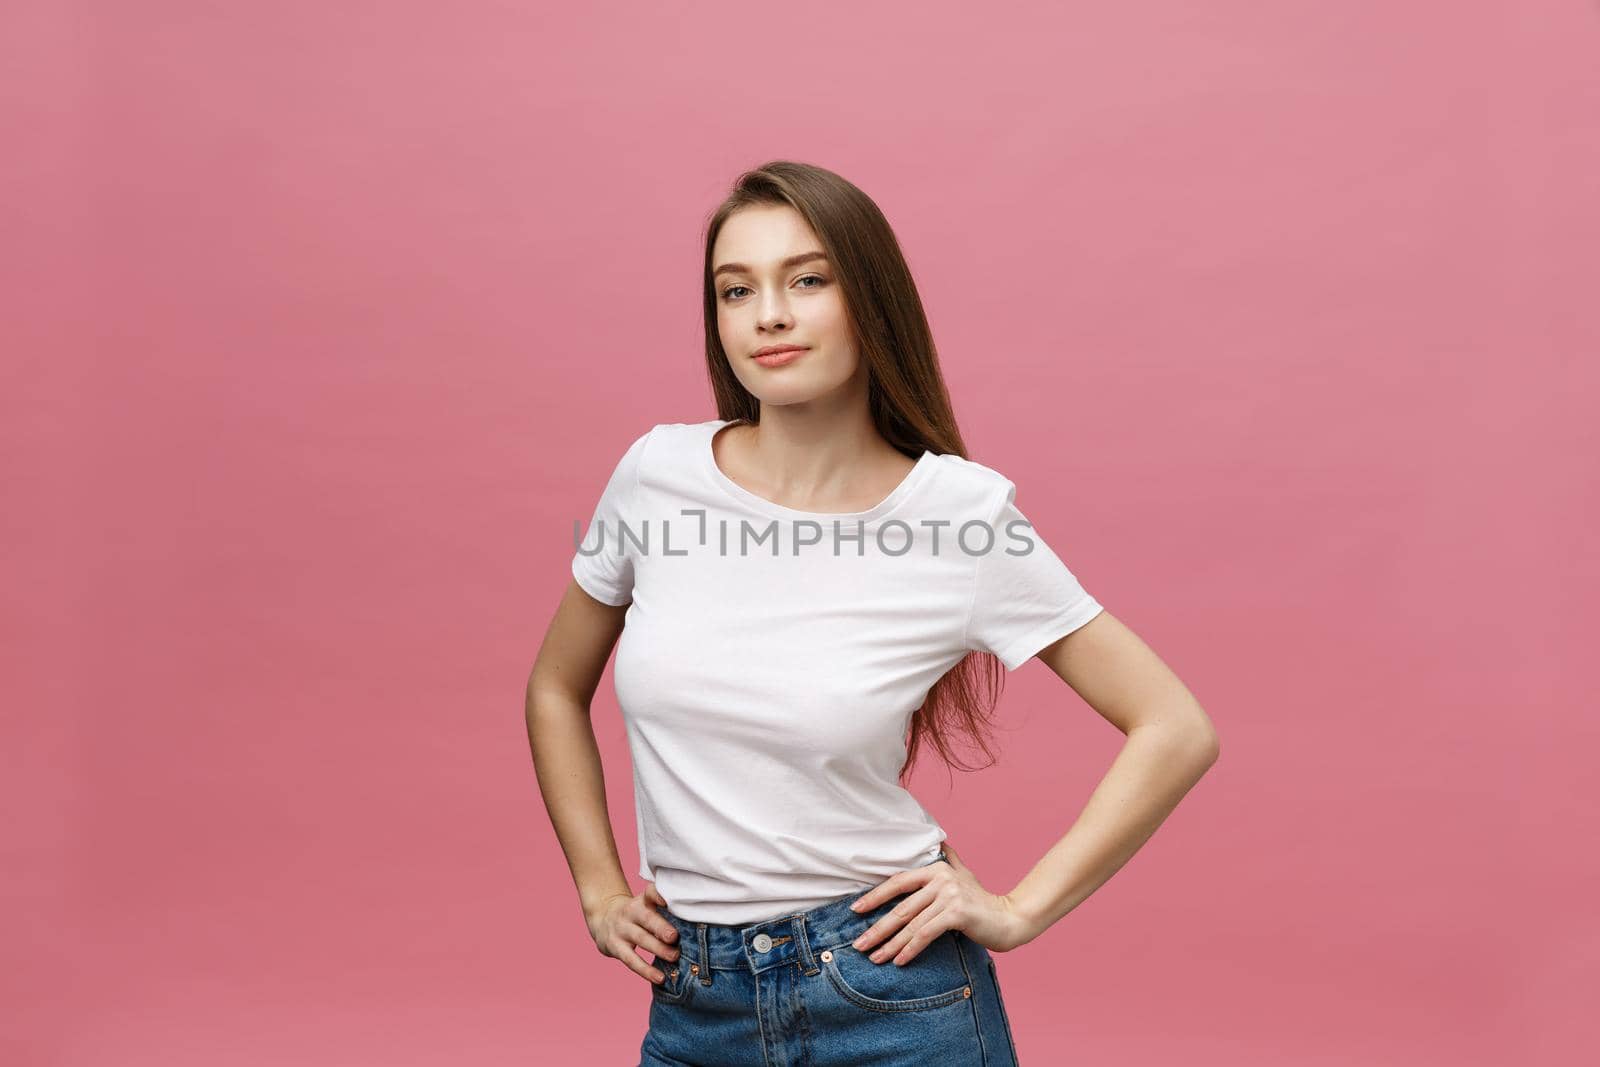 Surprised happy beautiful woman looking in excitement. Isolate over pink background and copy space